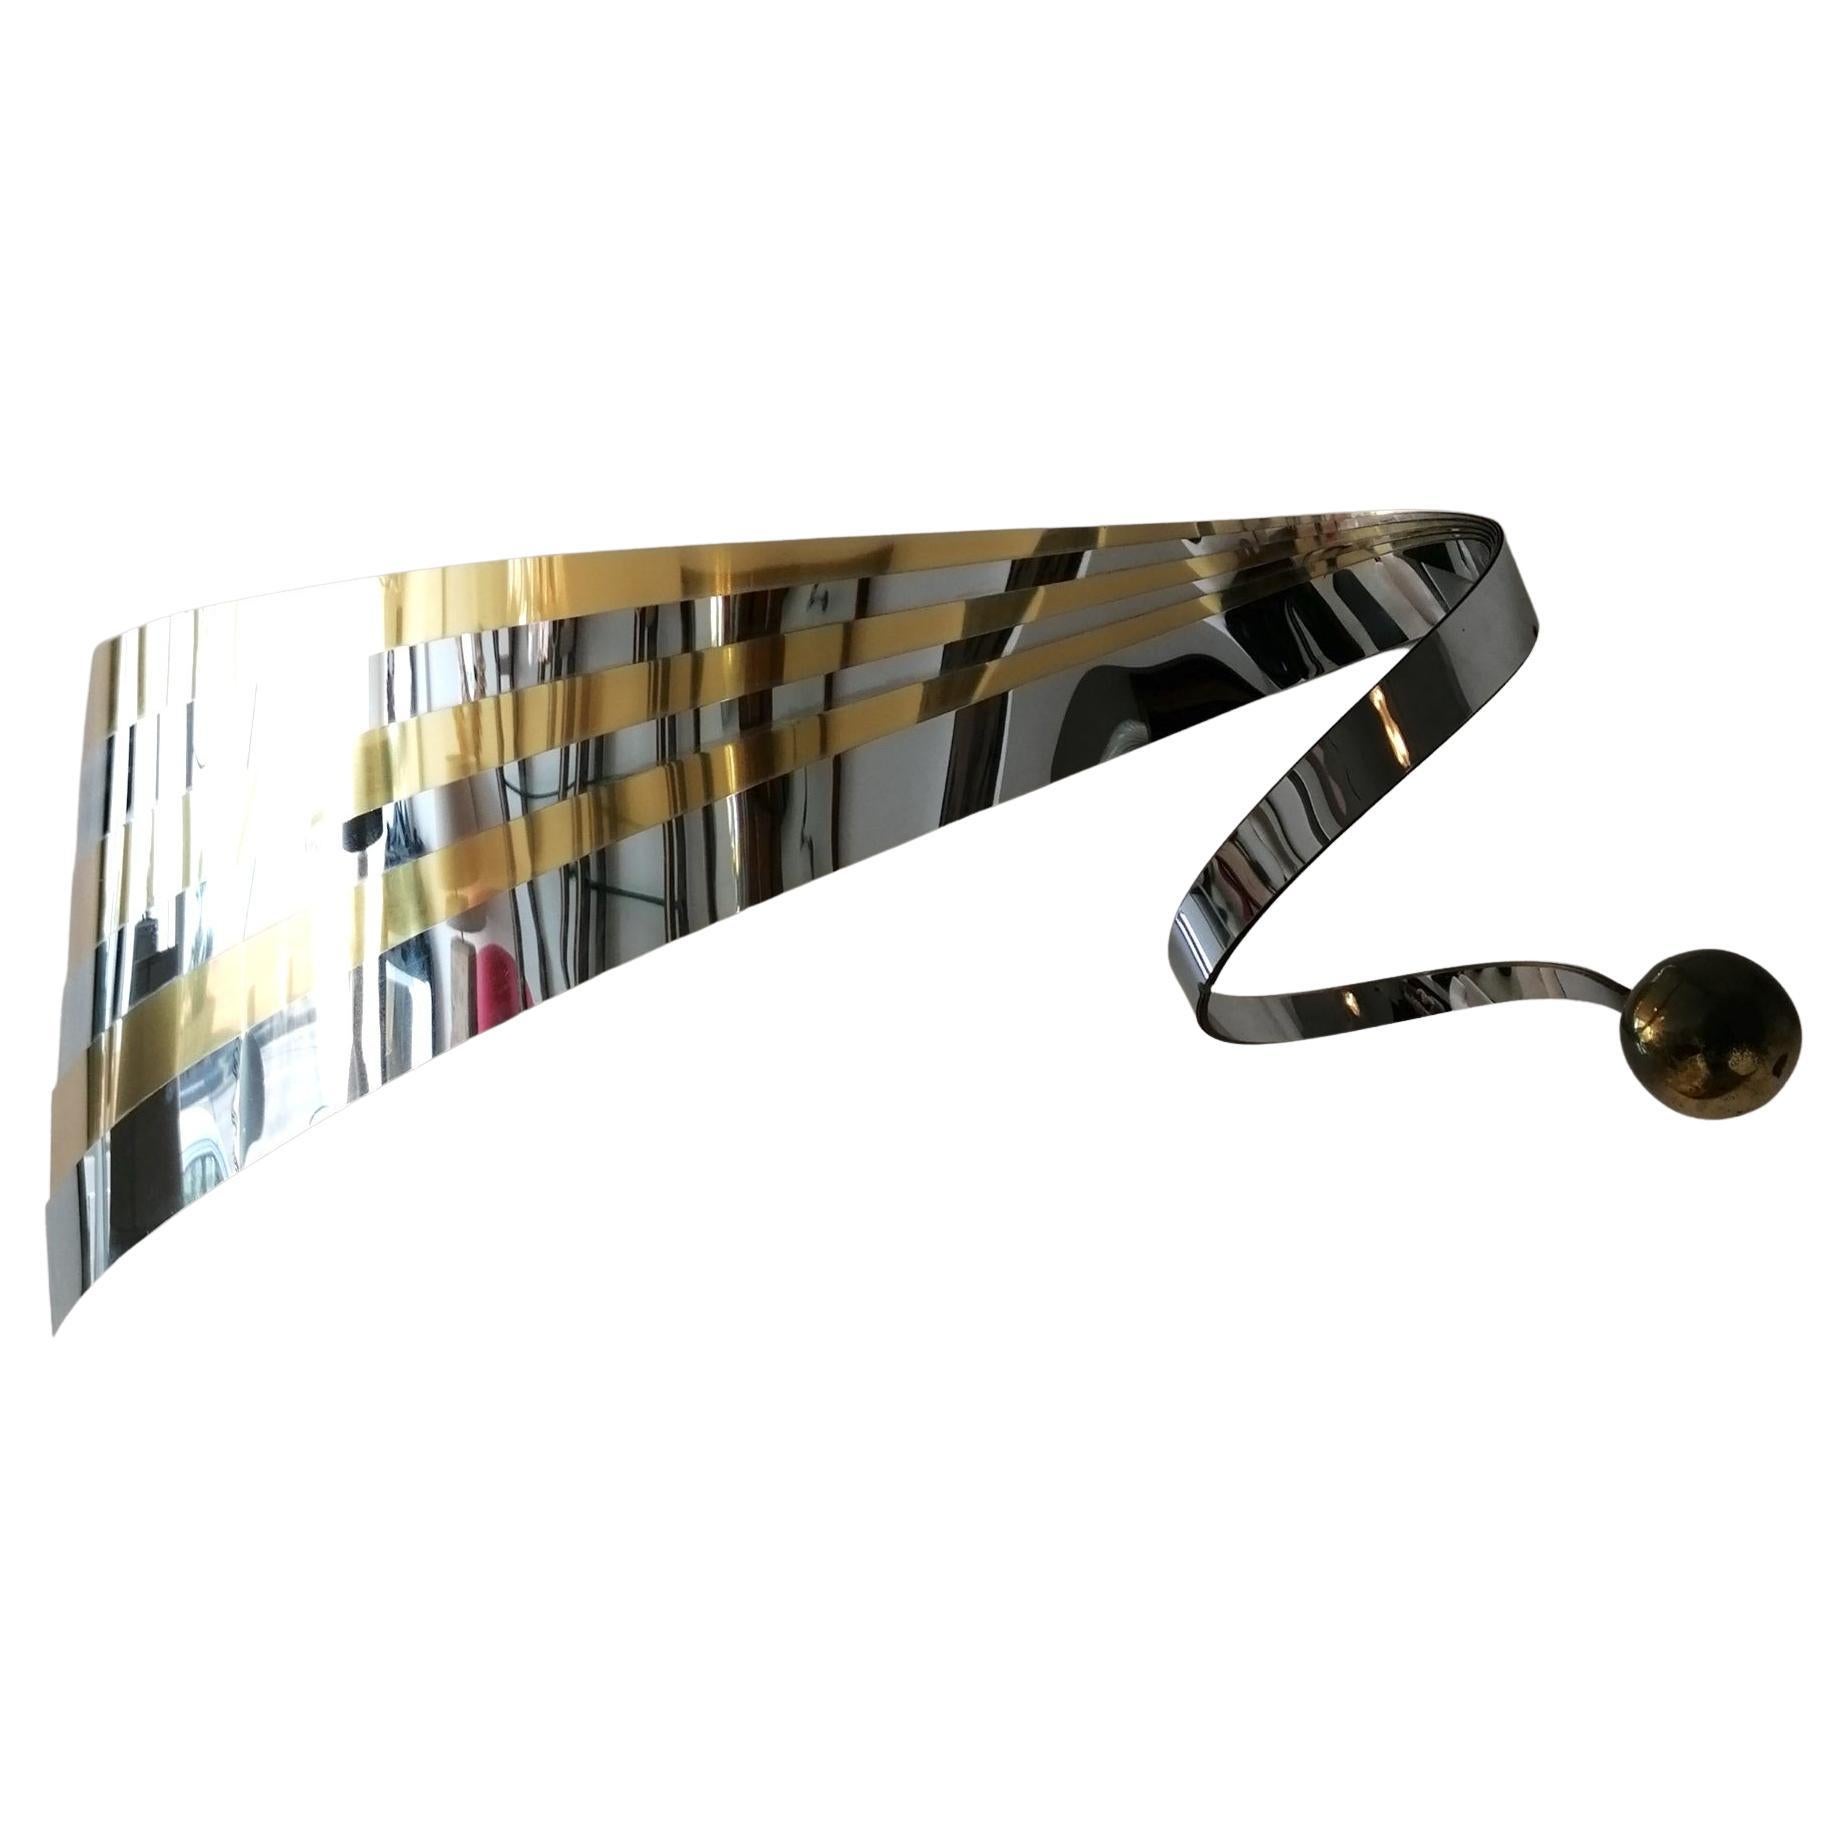 Rare 1989 gold & chrome undulating ribbon wall sculpture by Curtis Jere, USA. Signed & dated. Has 2 inbuilt hangers on the back.

Dimensions: Length 130cm, 59cm high, 19cm deep.